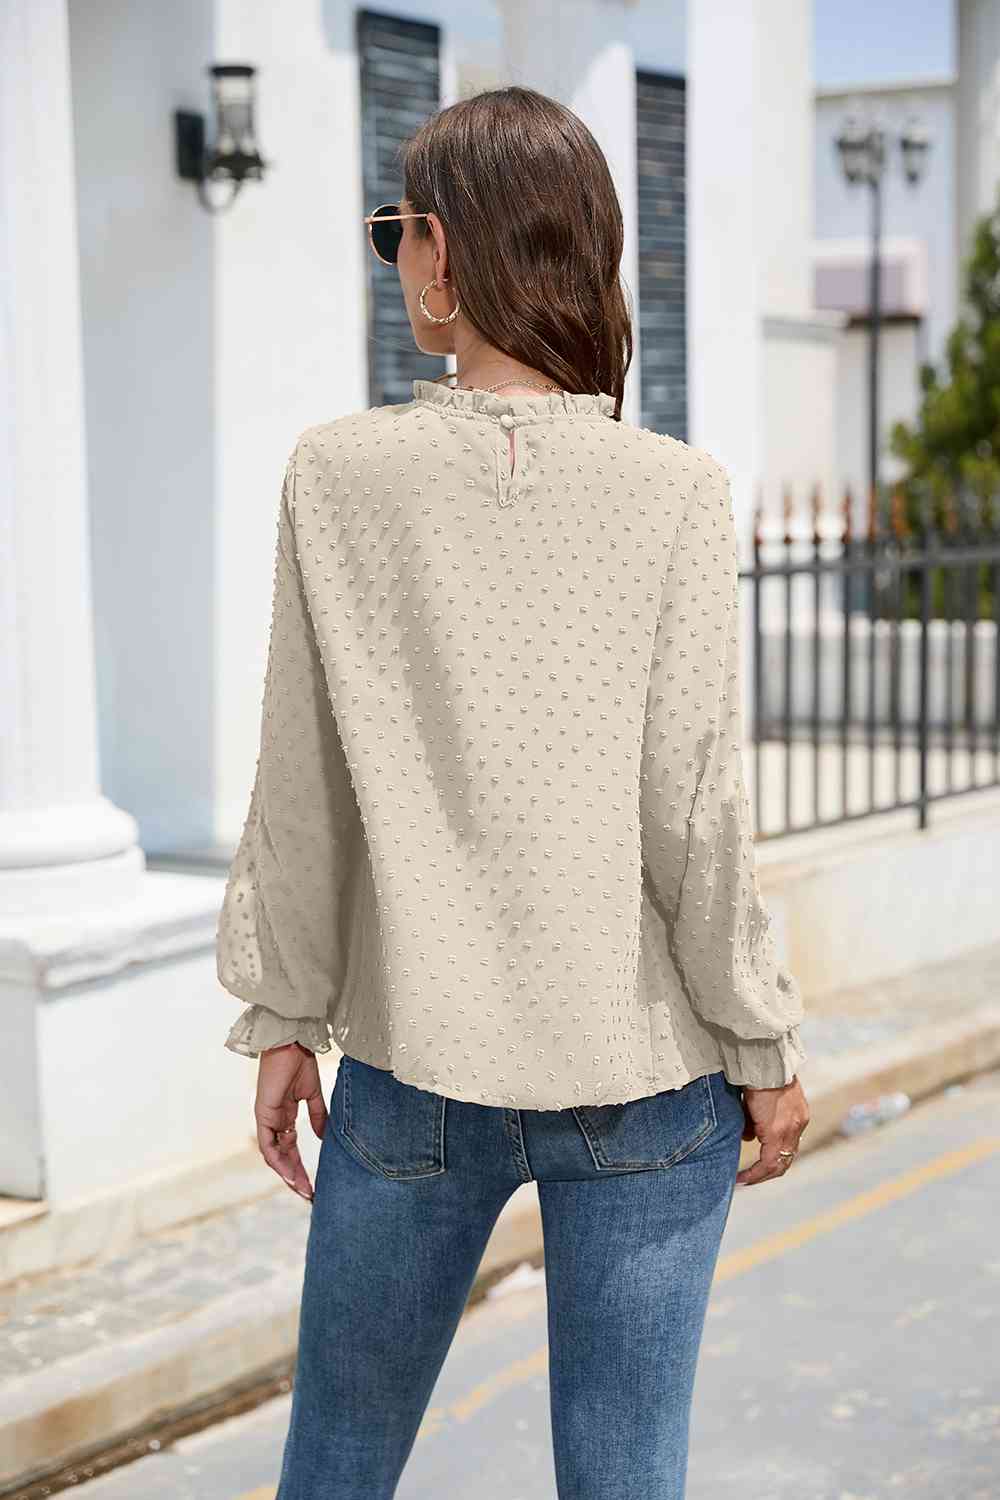 Smocked Mock Neck Swiss Dot Top - Women’s Clothing & Accessories - Shirts & Tops - 2 - 2024